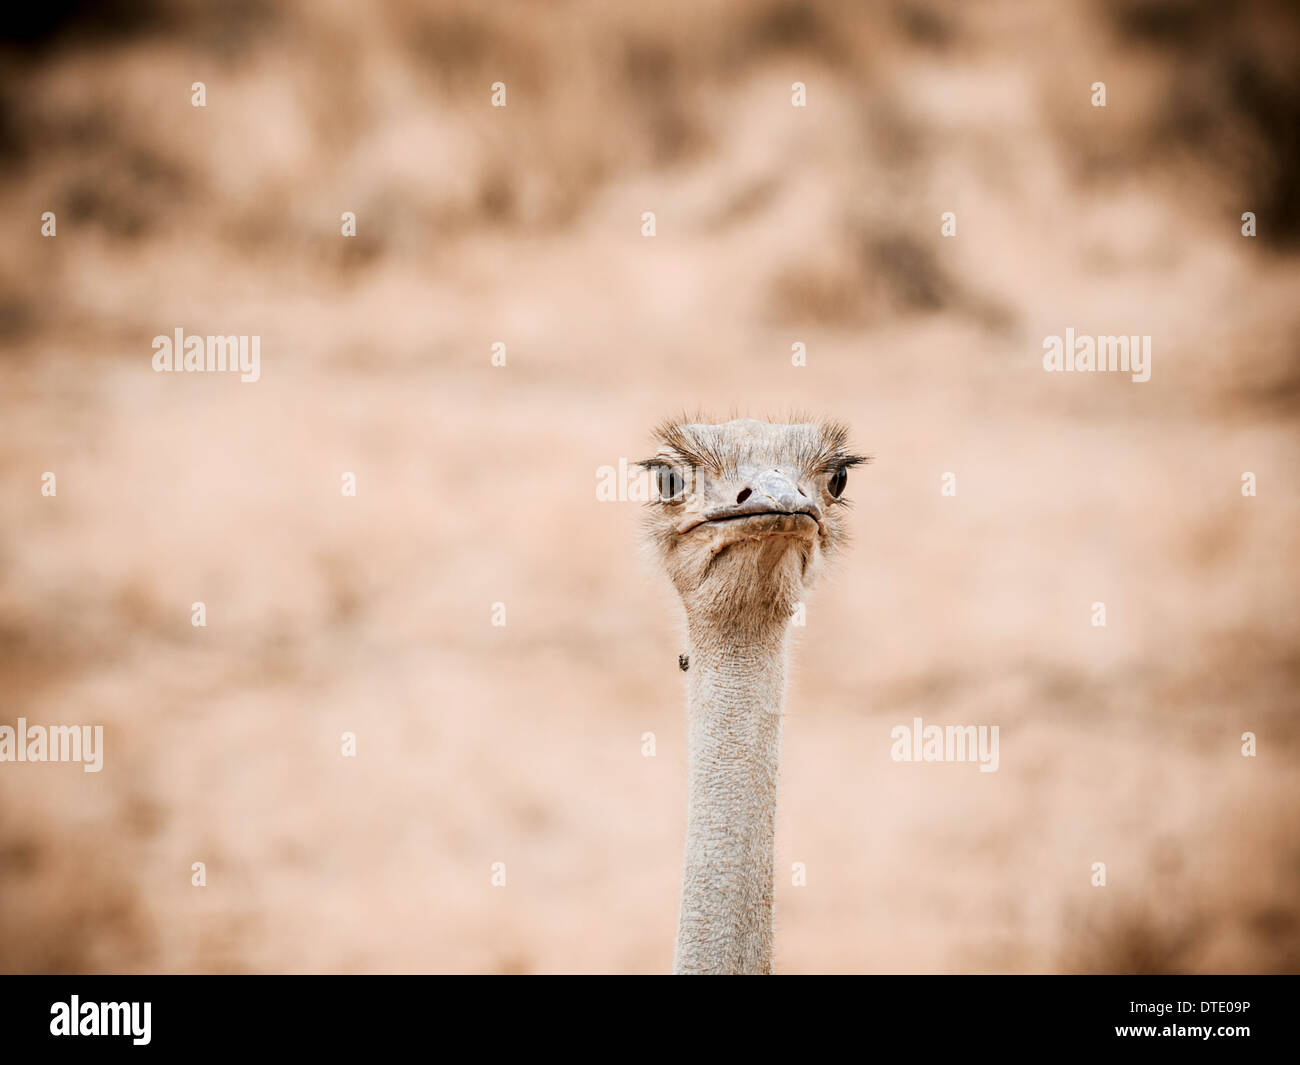 Ostrich or Common Ostrich (Struthio camelus) Stock Photo